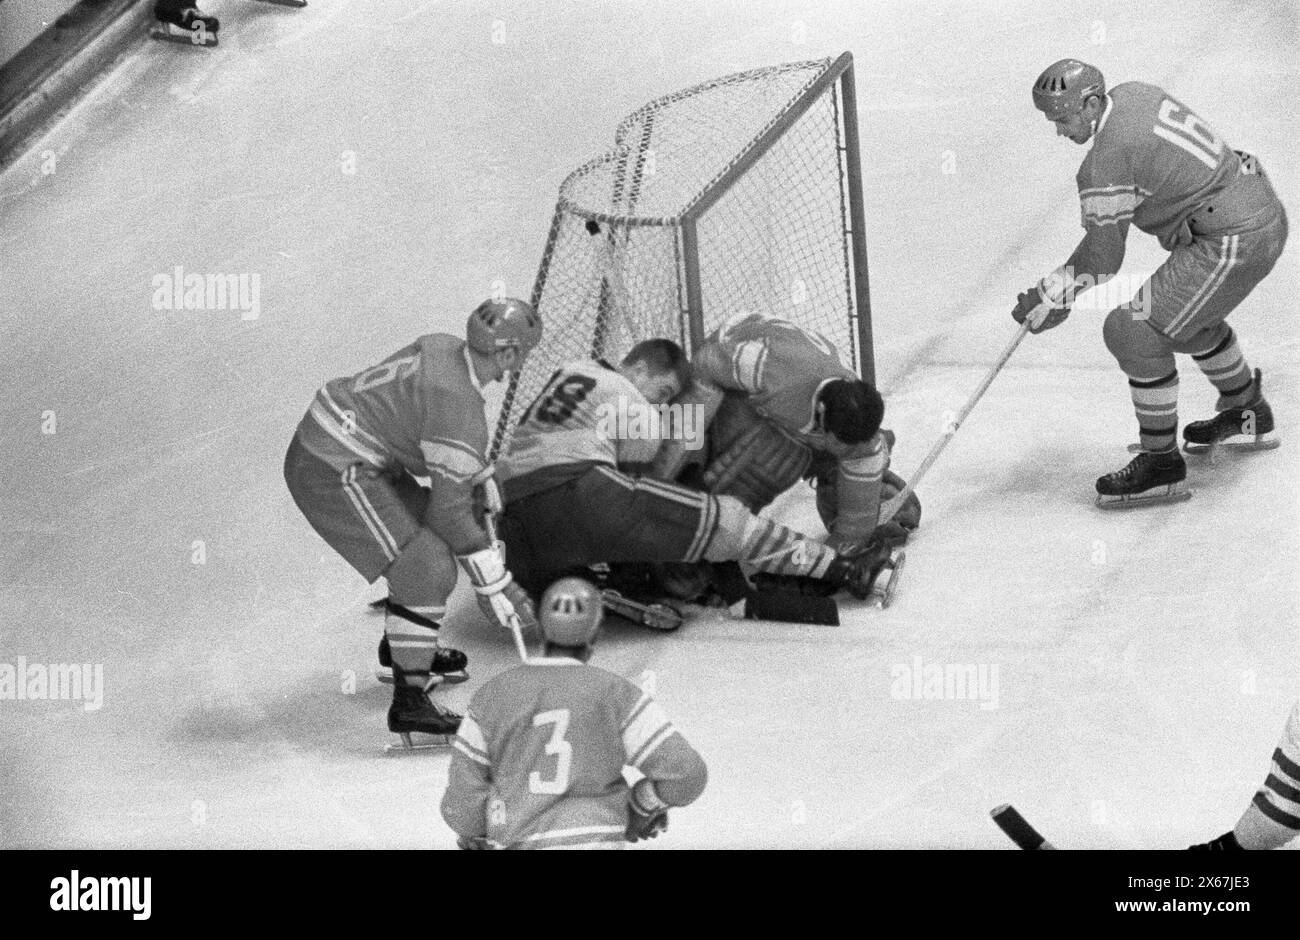 Vintage Winter Olympics Games Photo: Grenoble 68, Ice hockey competition.   USSR v Sweden 3-2.  Soviet Goalie, Victor Zinger,  stops puck in crease, during match action. Stock Photo